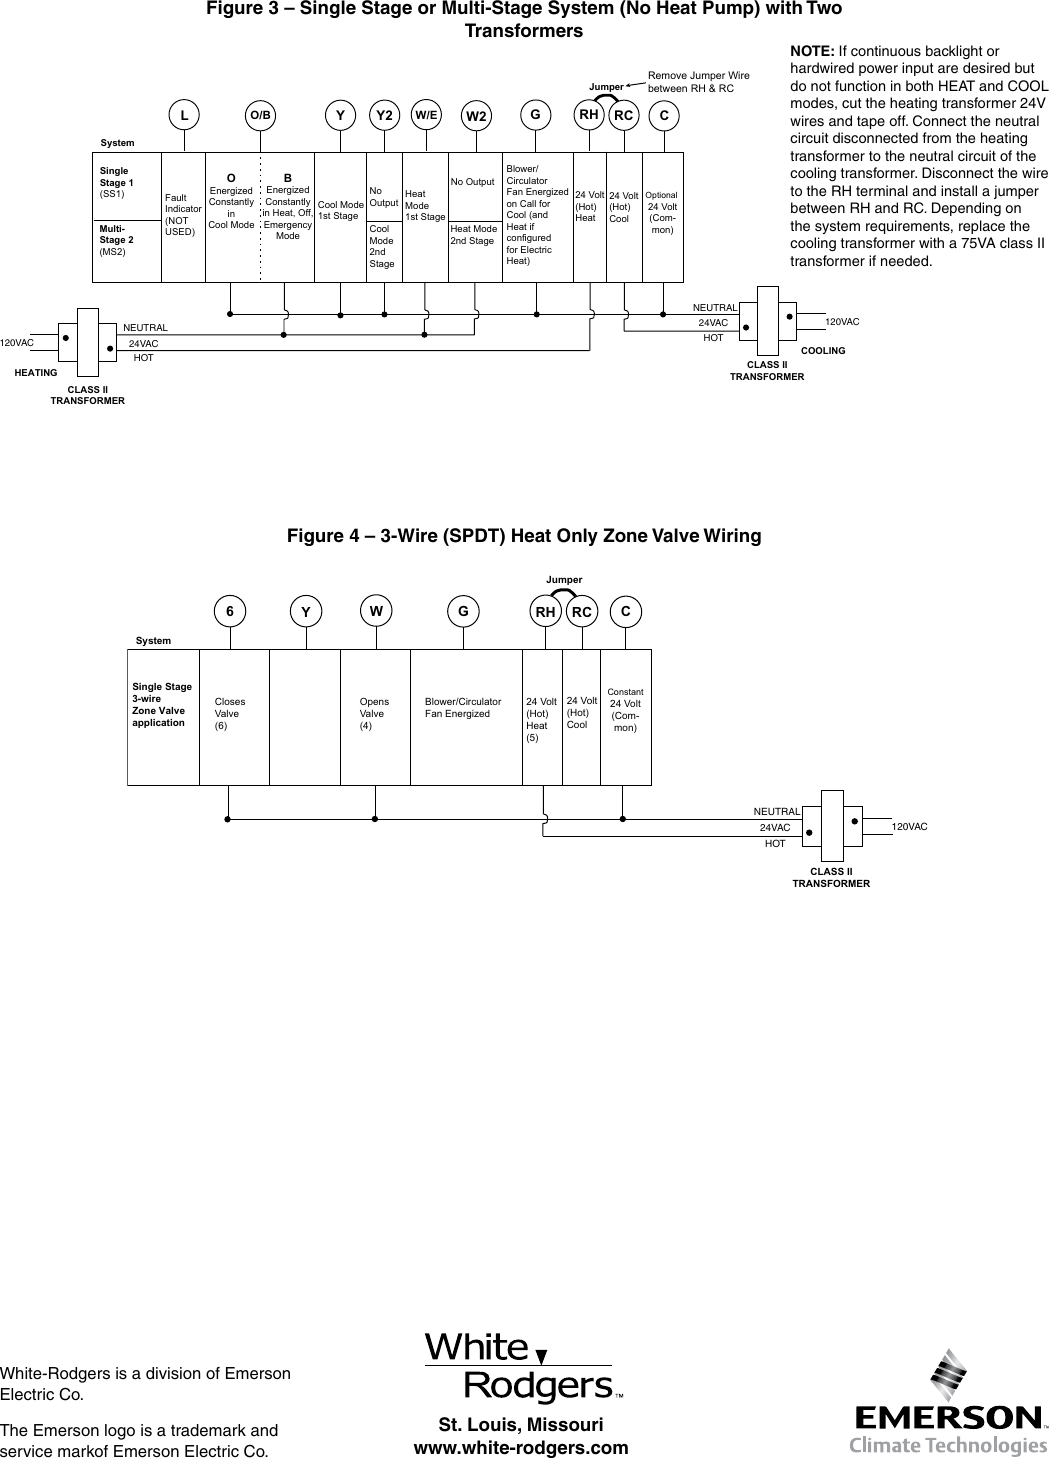 Page 2 of 4 - White-Rodgers White-Rodgers-1F85-0422-Emerson-Blue-4-Programmable-Thermostat-Wiring-Diagram-  White-rodgers-1f85-0422-emerson-blue-4-programmable-thermostat-wiring-diagram